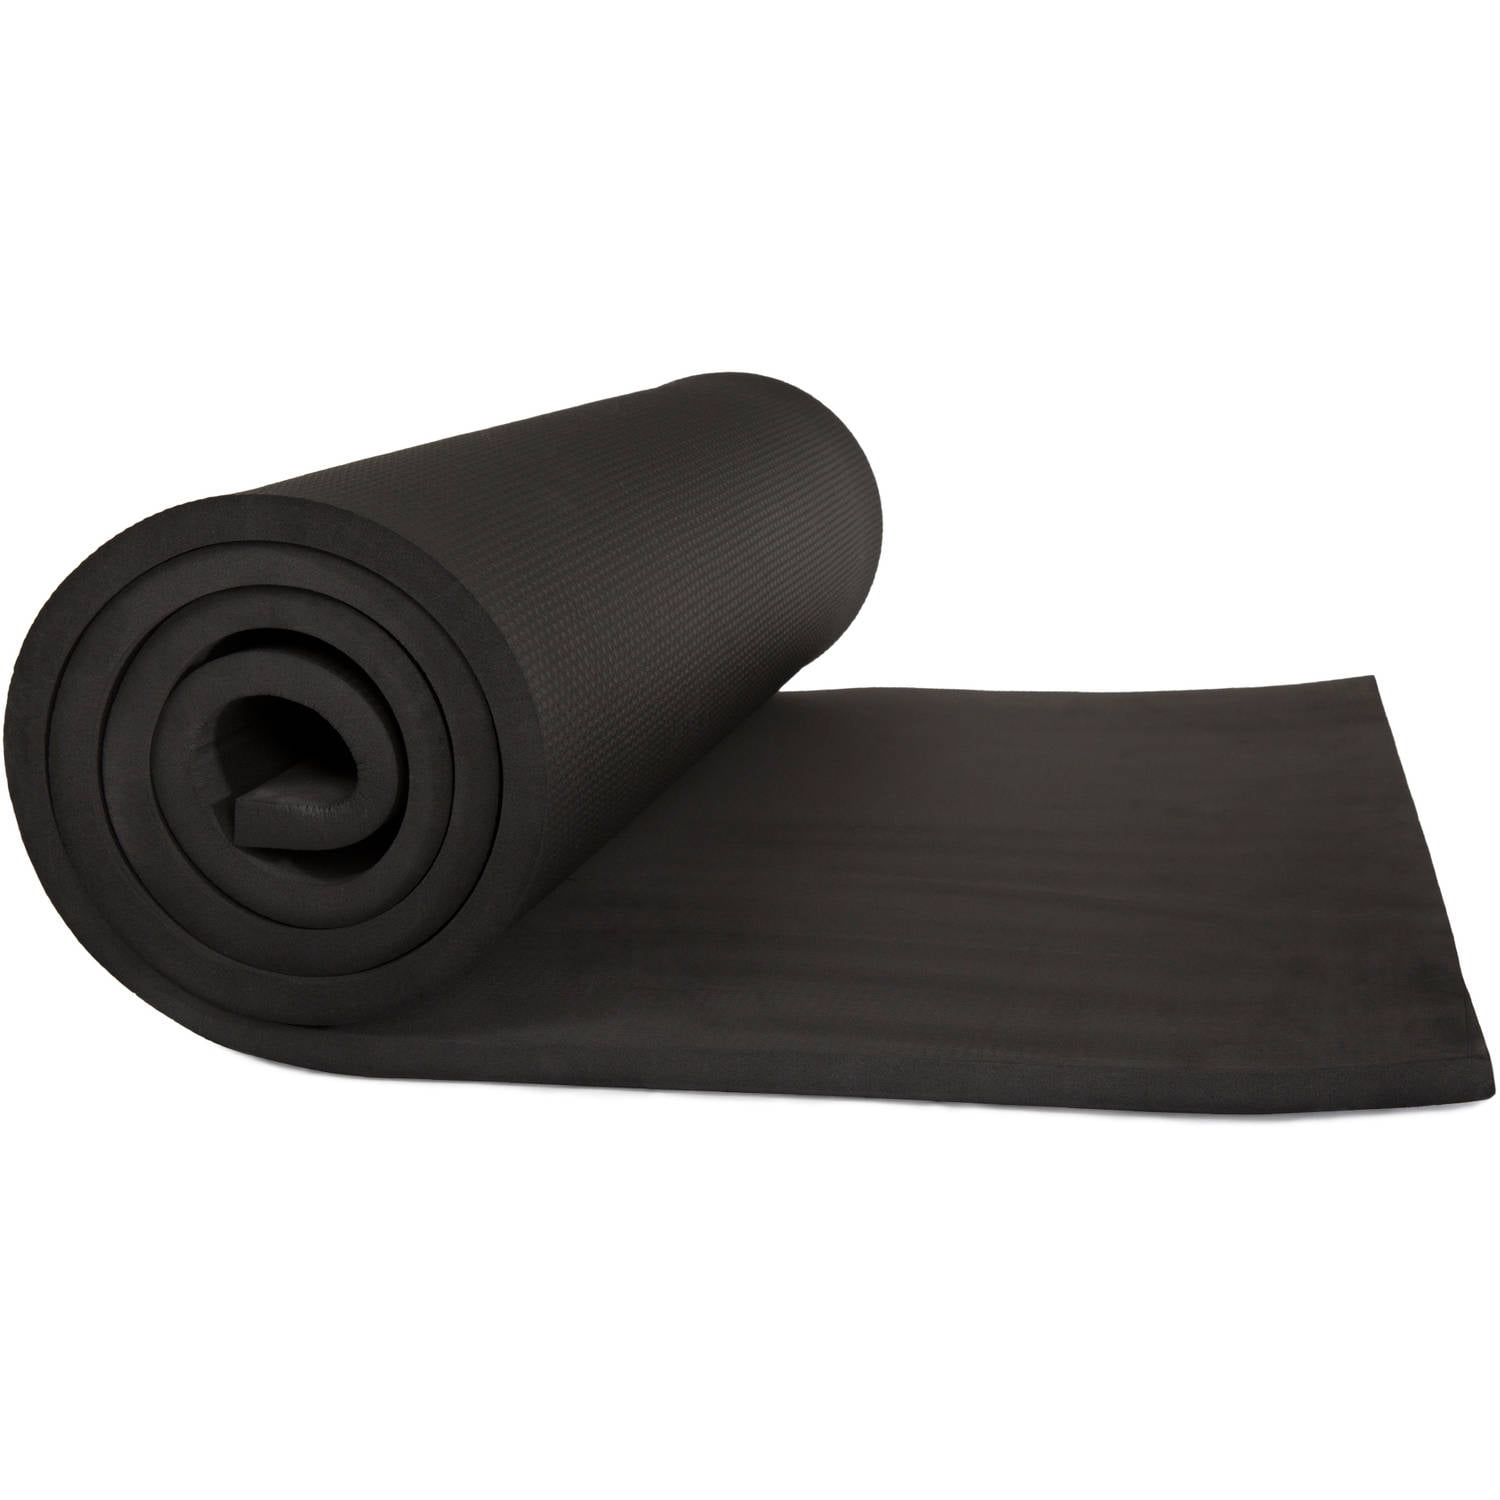 Wakeman Fitness 1 2 In Extra Thick Yoga Mat With Carrying Strap Black Walmart Com Walmart Com